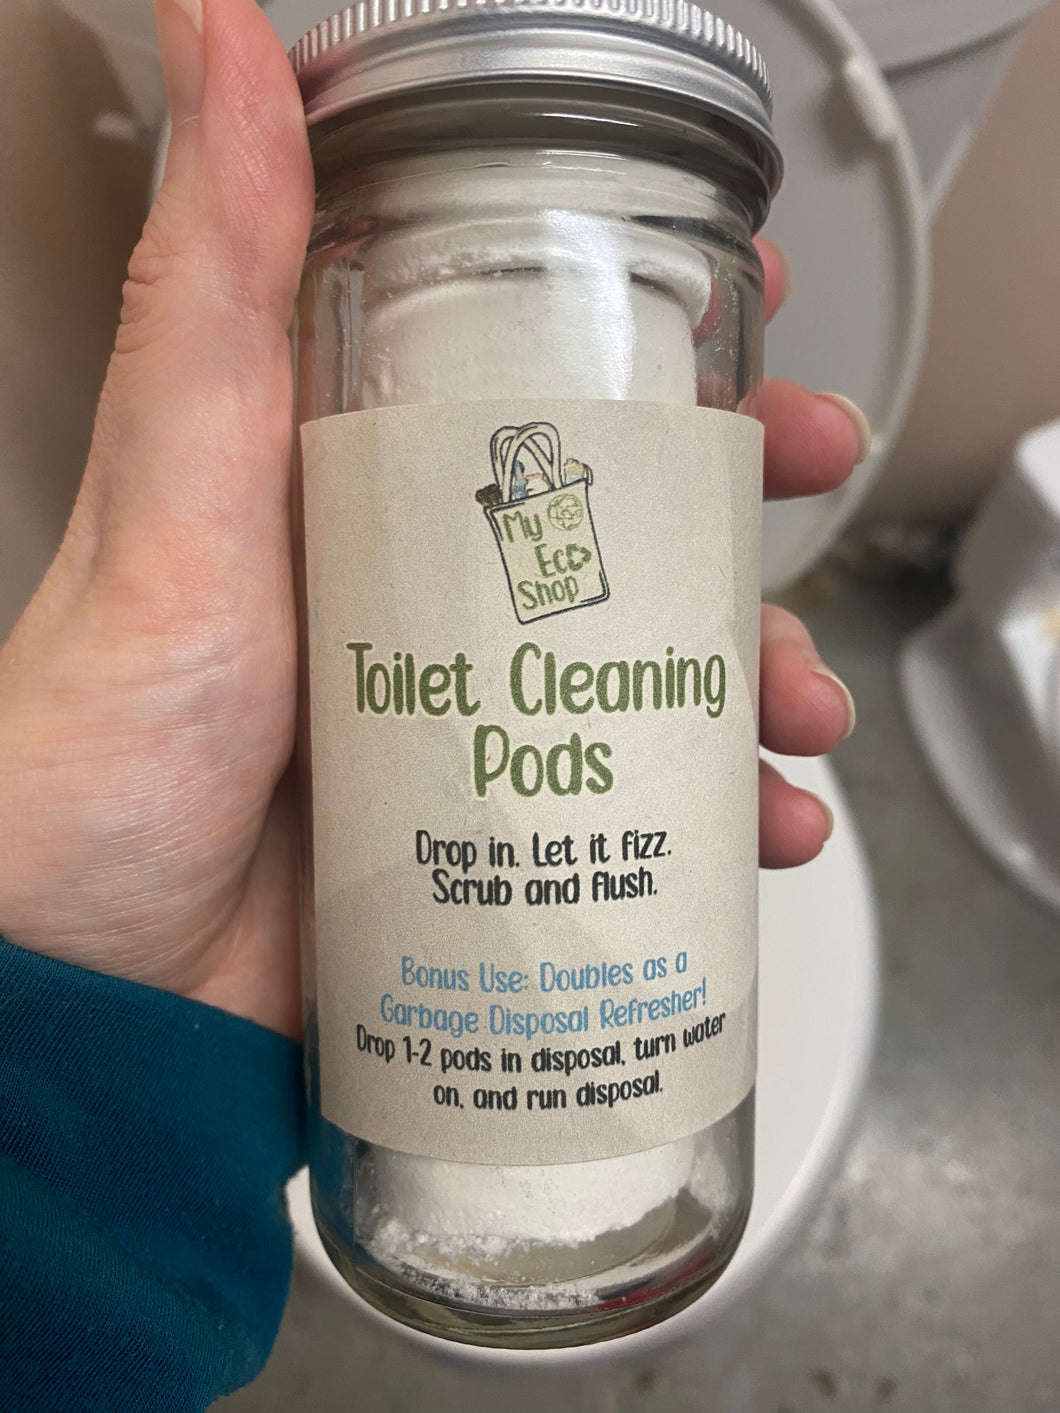 Toilet Cleaning Pods